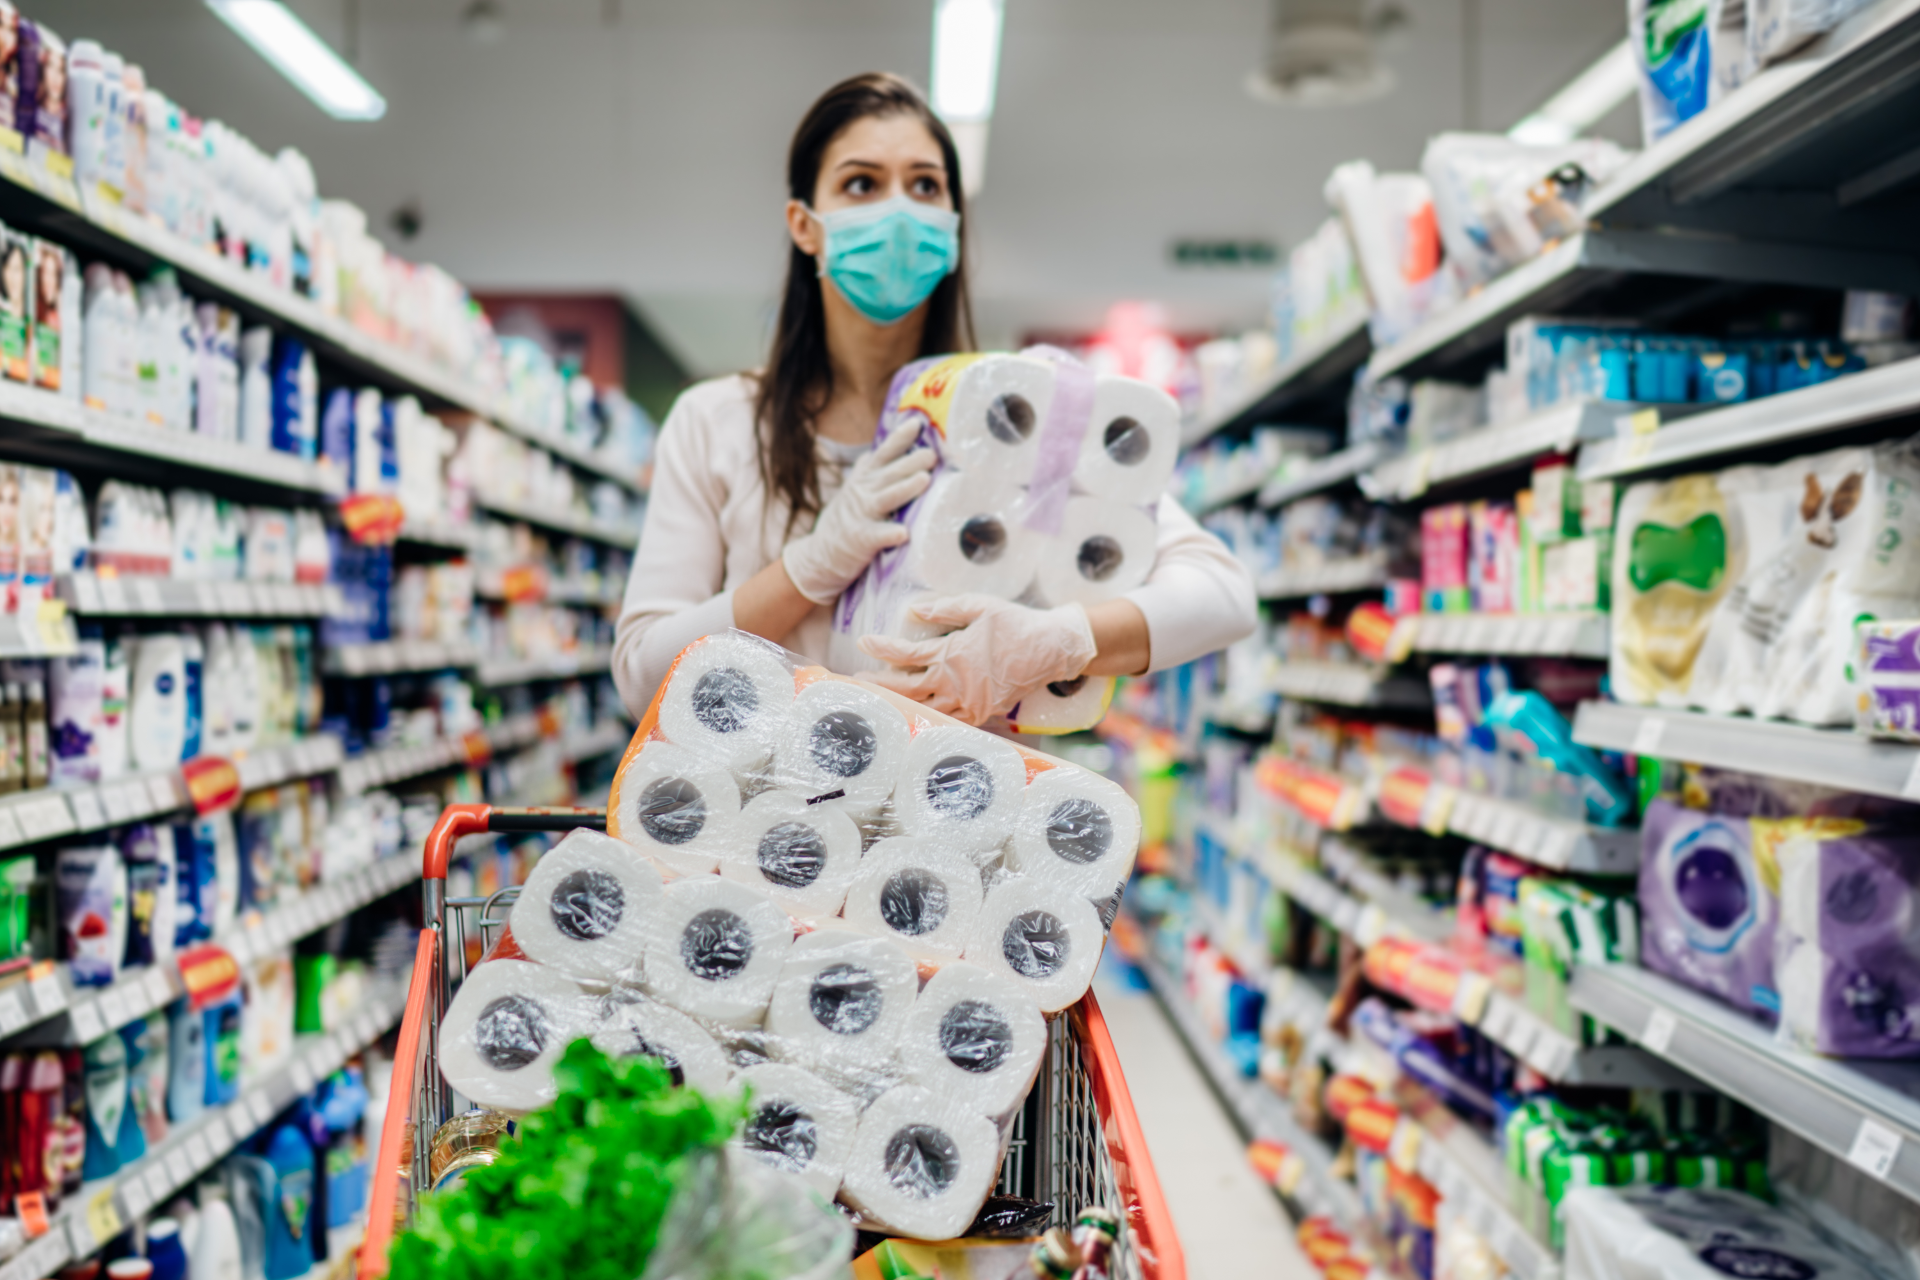 Woman shopping in a store for toilet paper while wearing a medical face mask and gloves